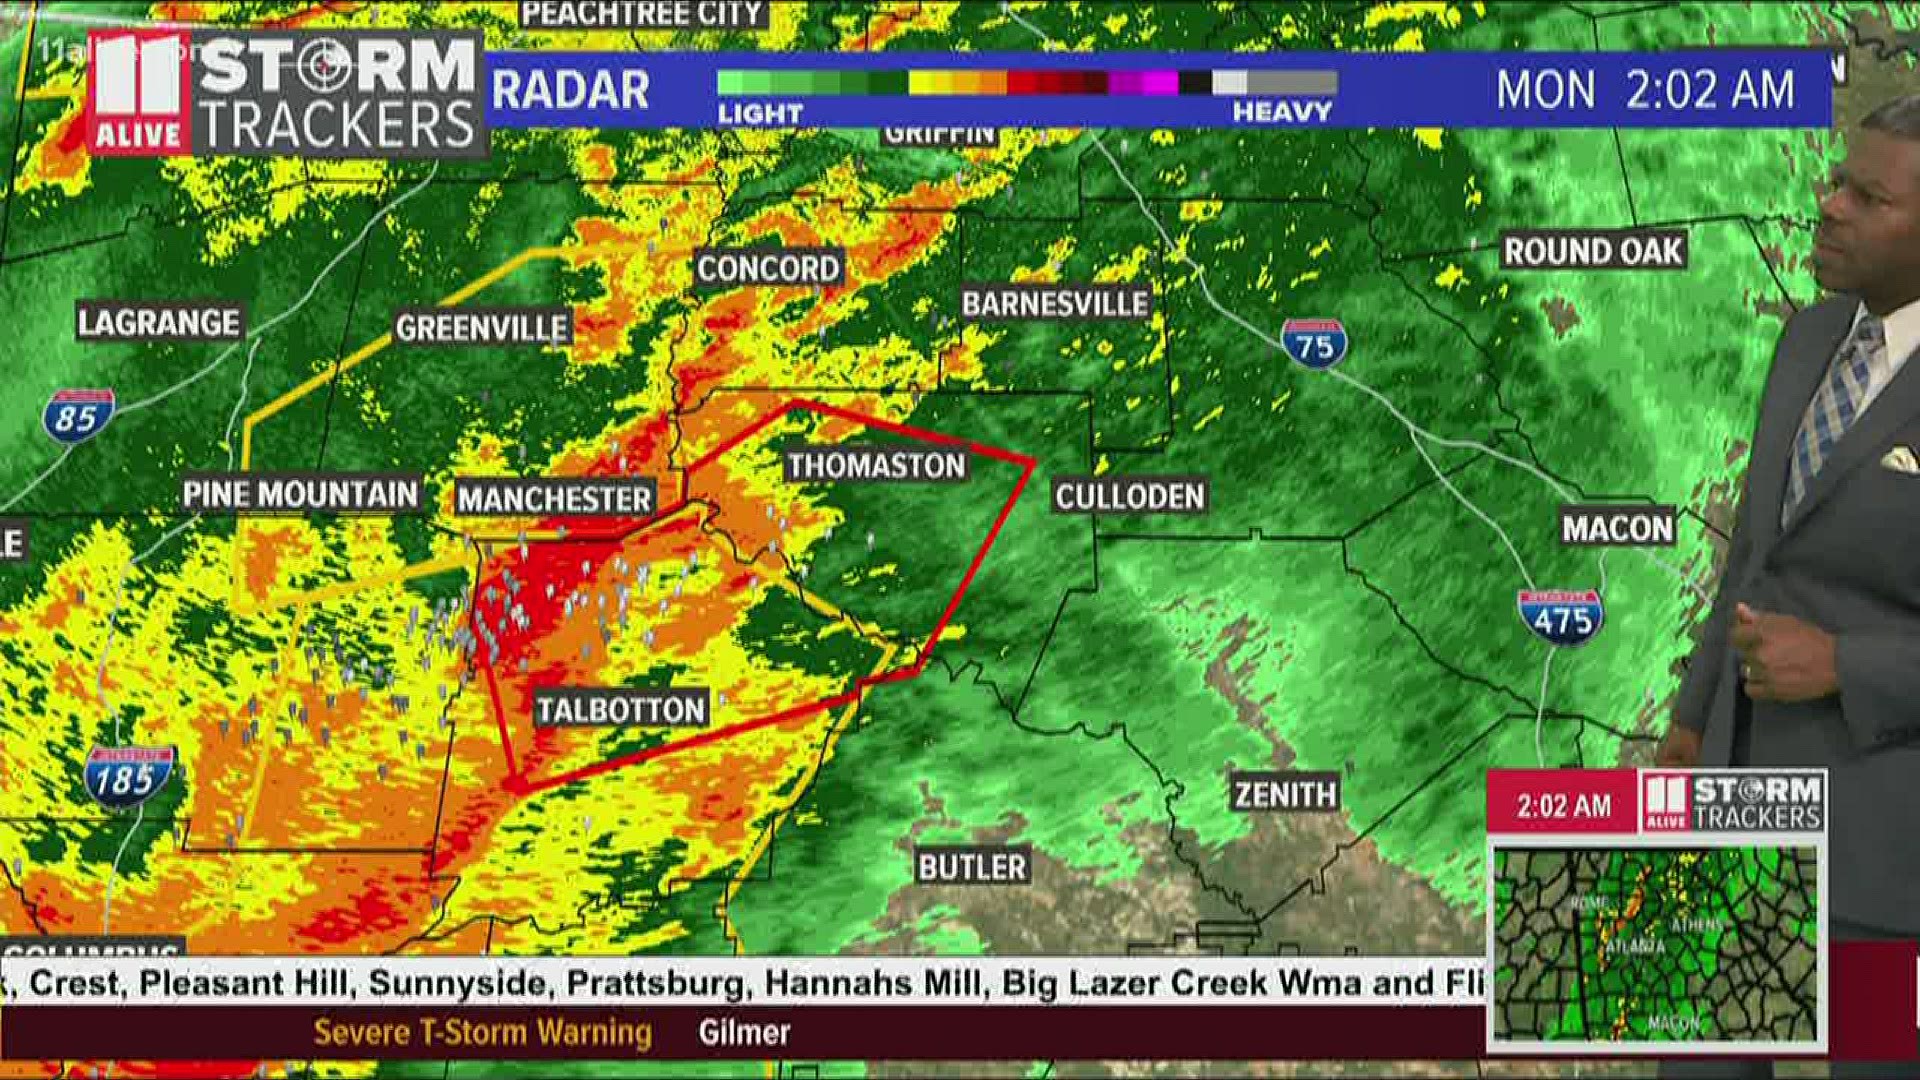 Tornado warning issued for Upson, Talbot Counties that is expected to expire around 2:30 a.m.